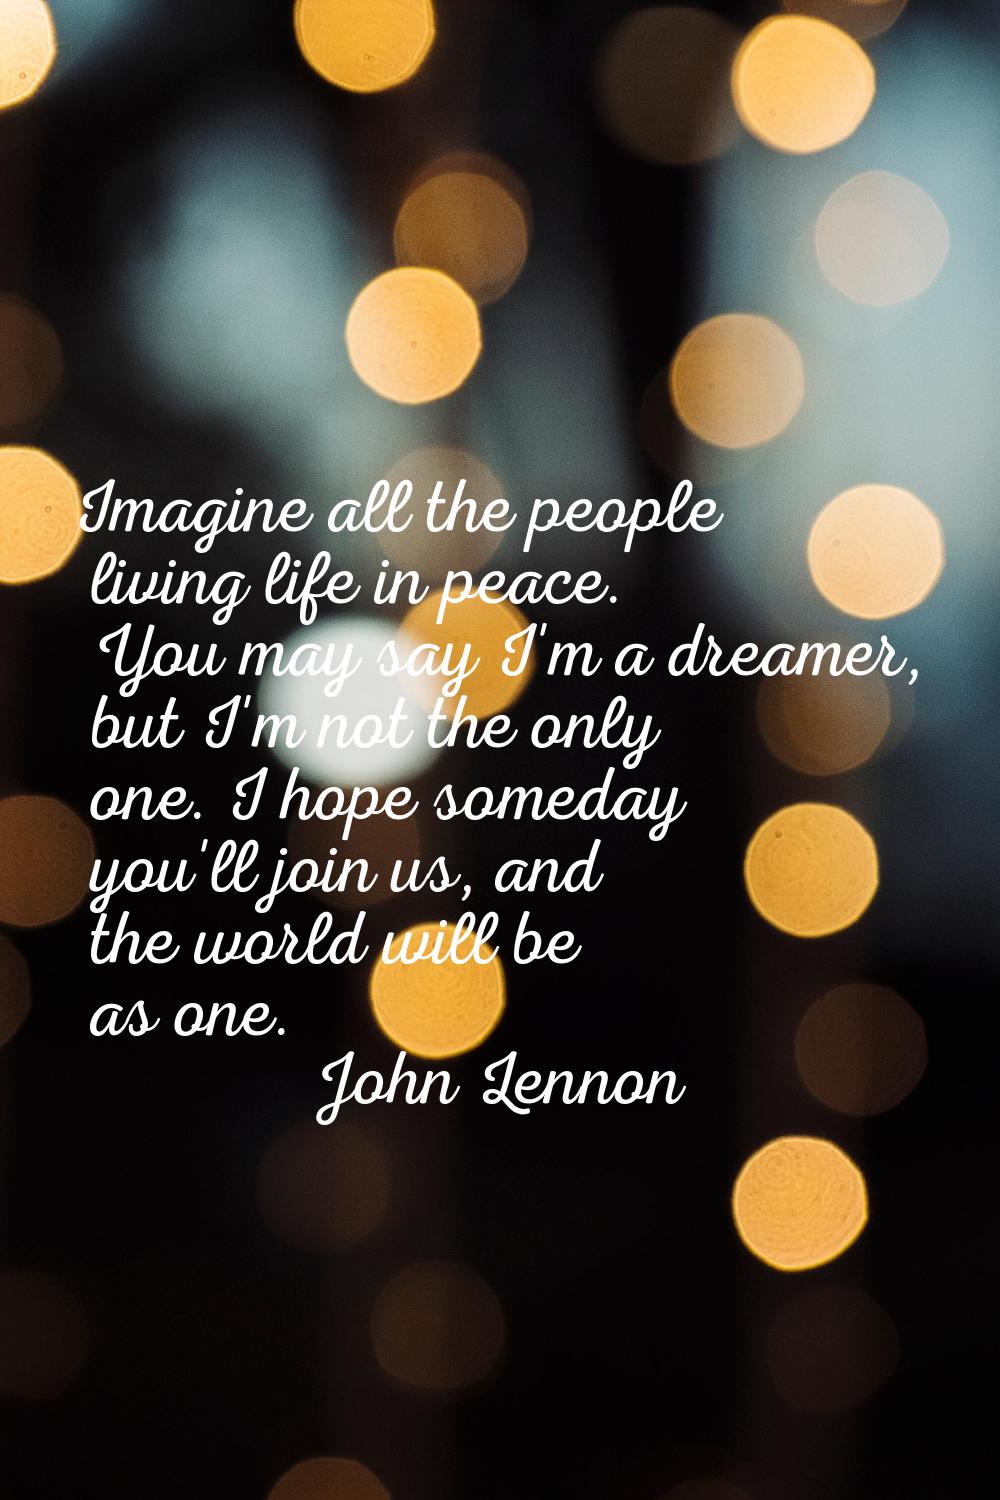 Imagine all the people living life in peace. You may say I'm a dreamer, but I'm not the only one. I